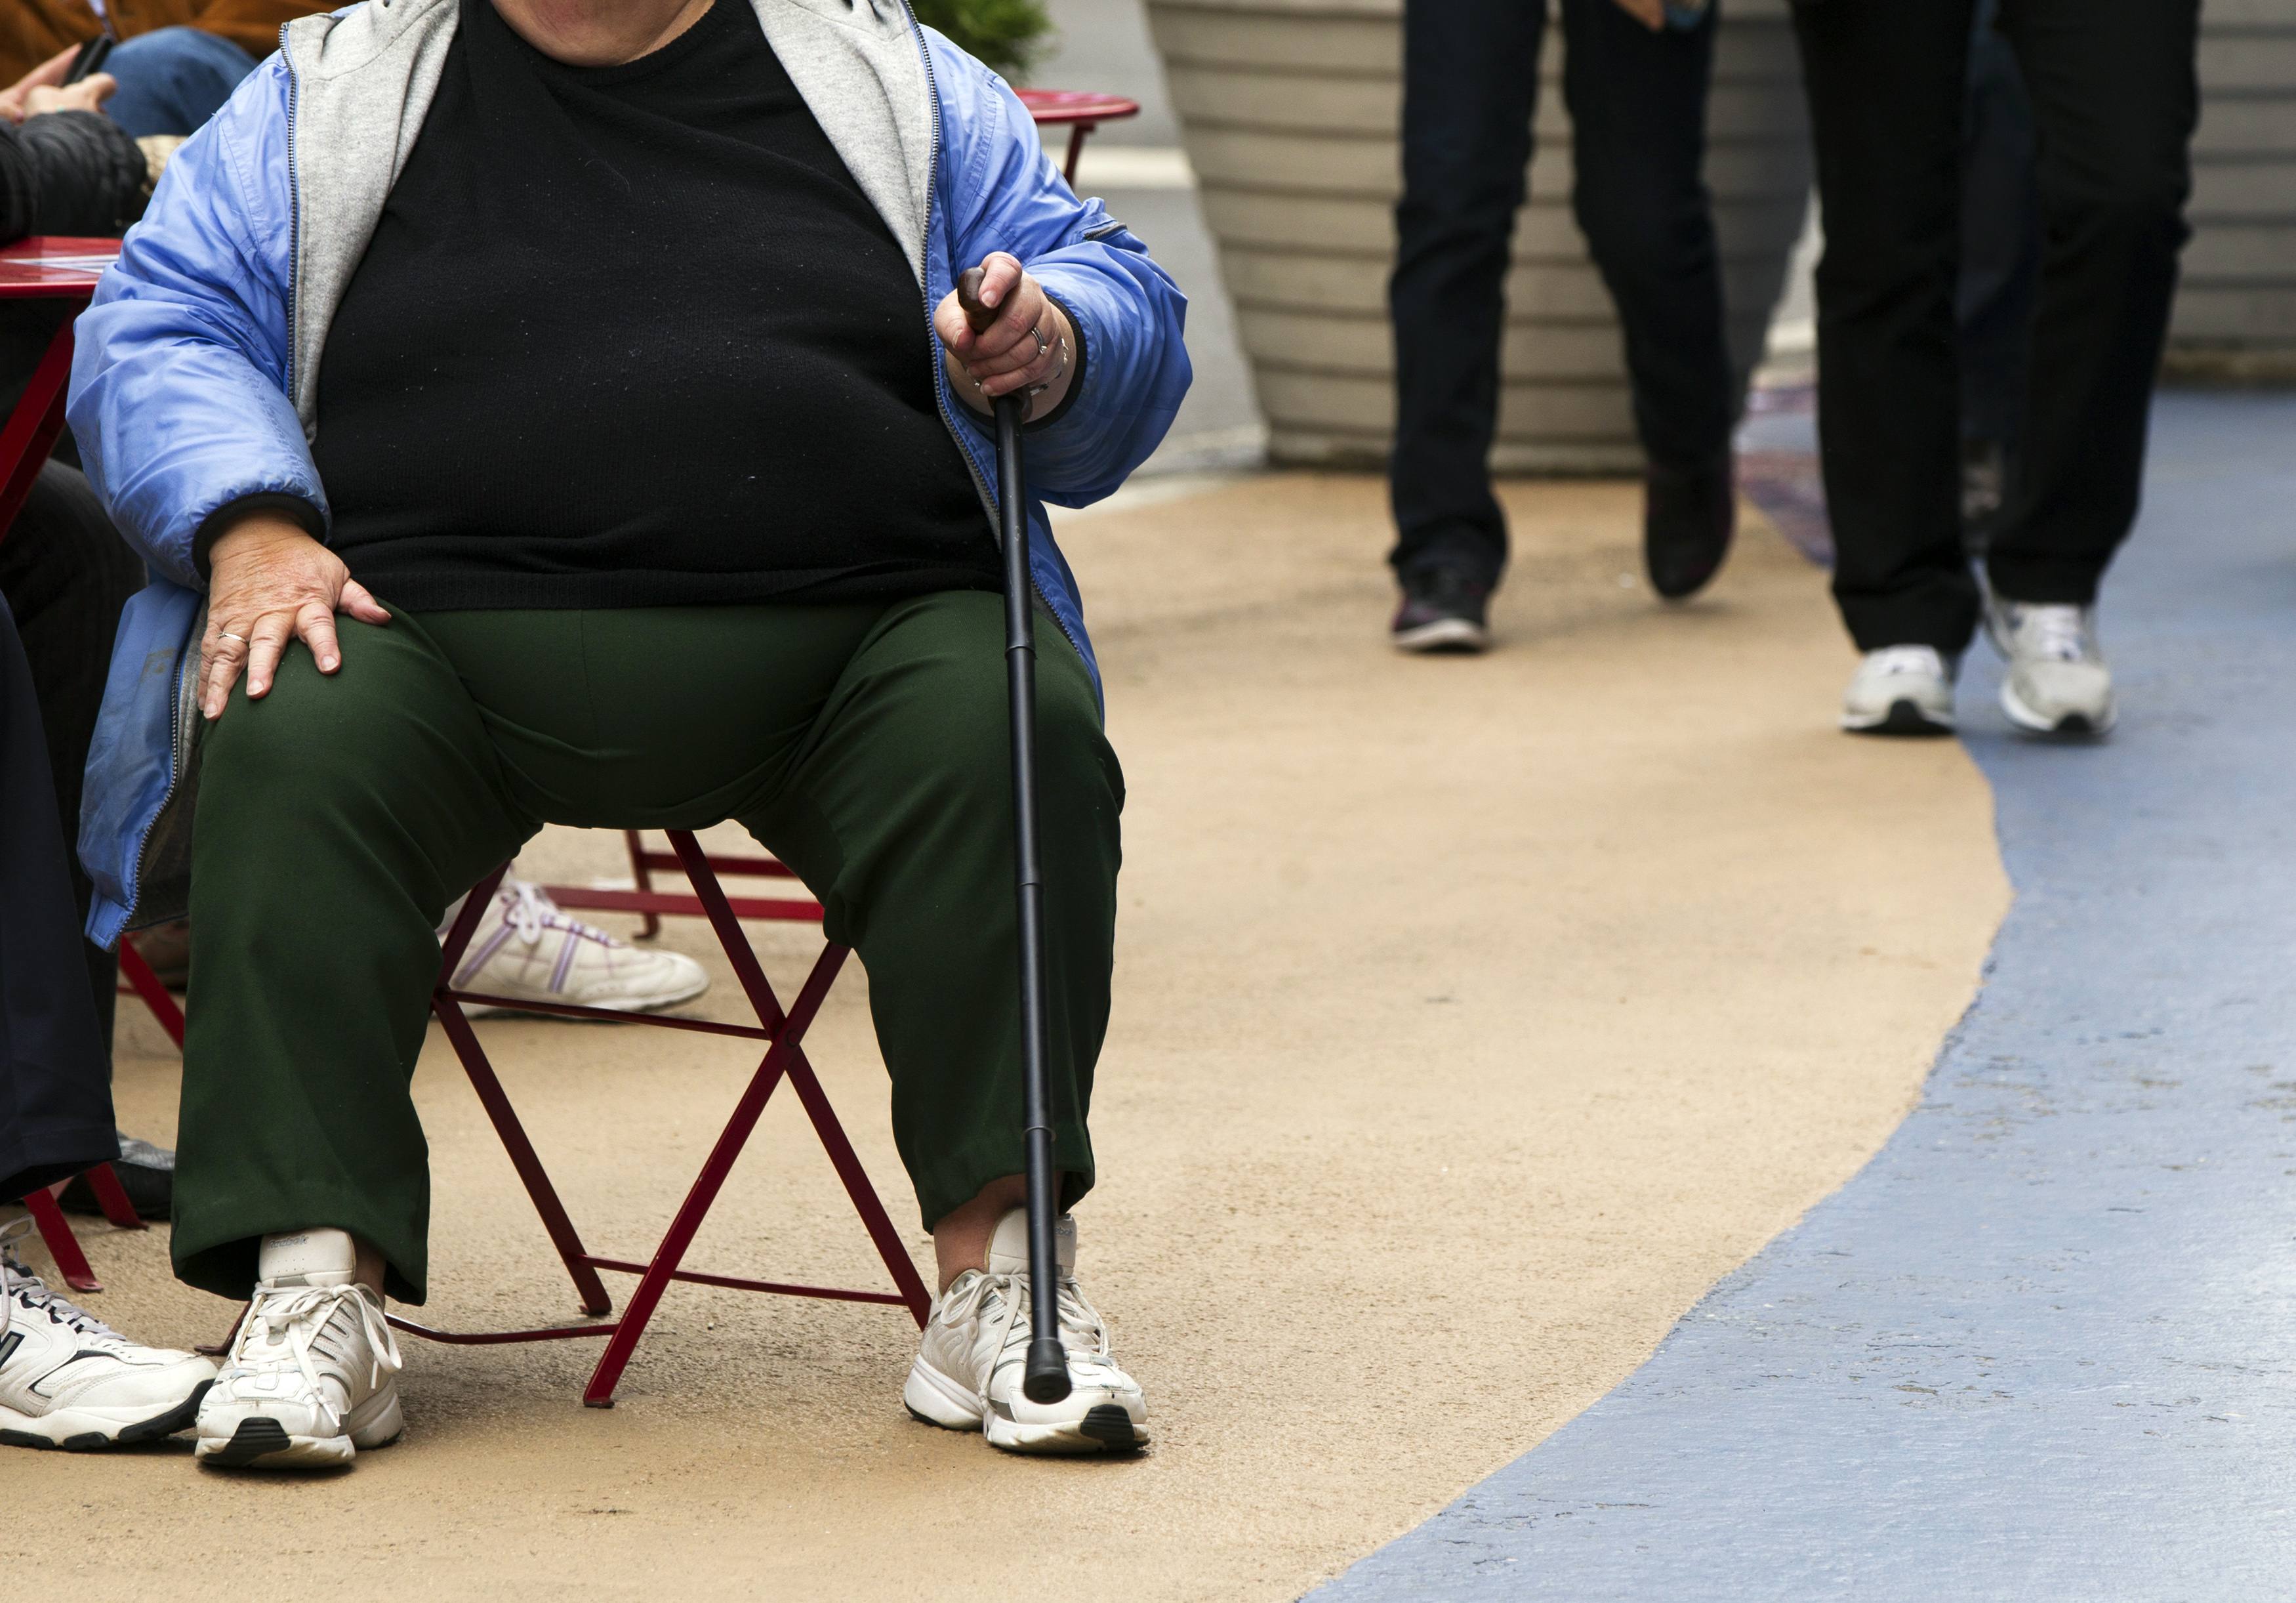 Staggering news: obesity rates triple for men worldwide